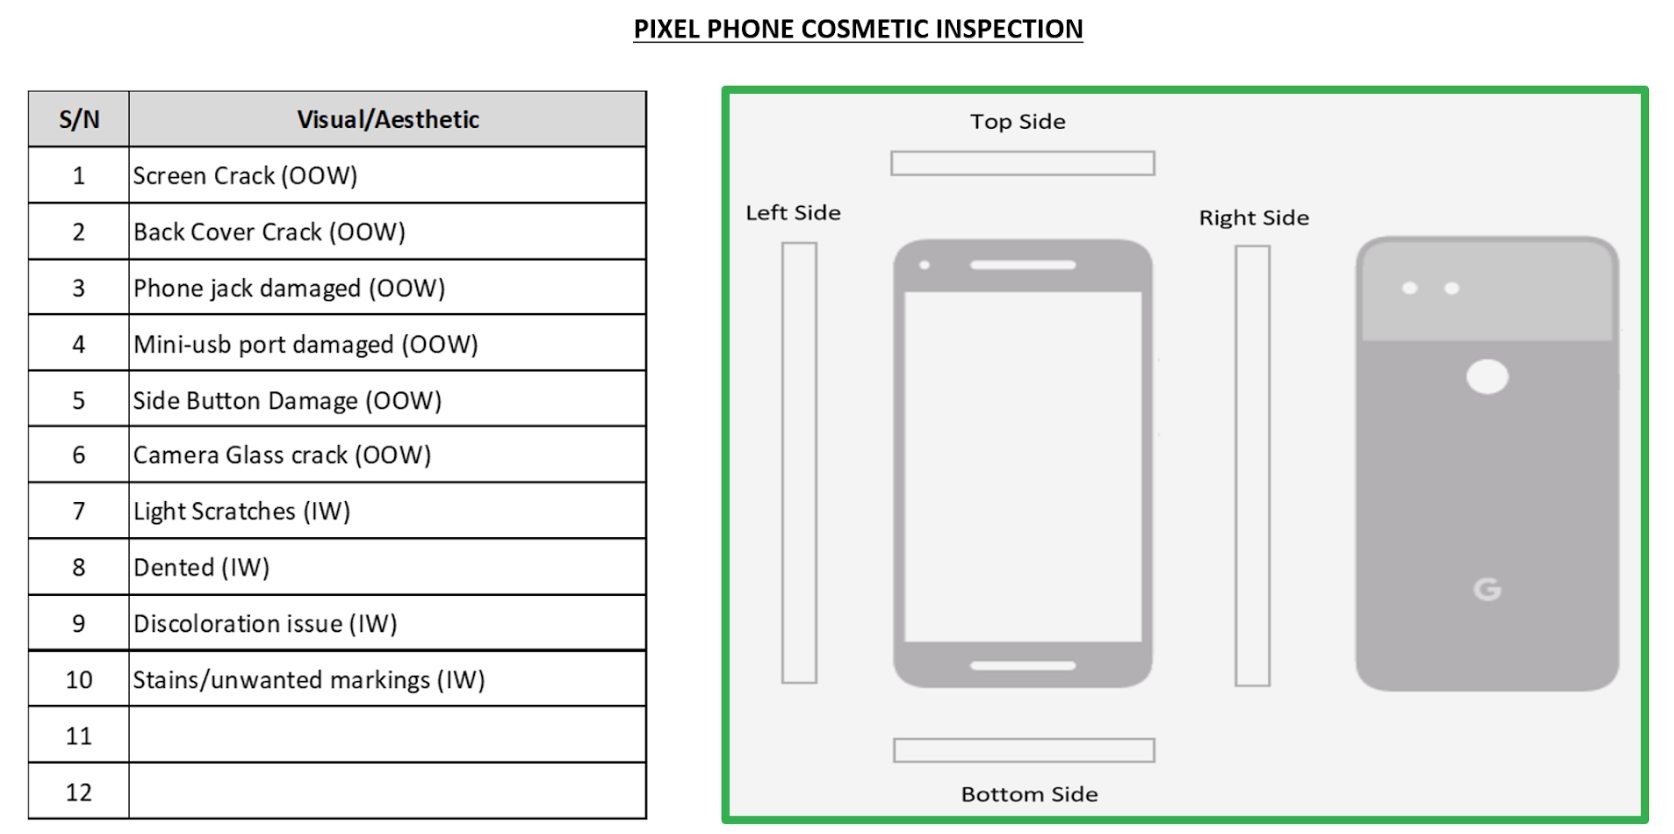 Visual & aesthetic checklist for phone inspection